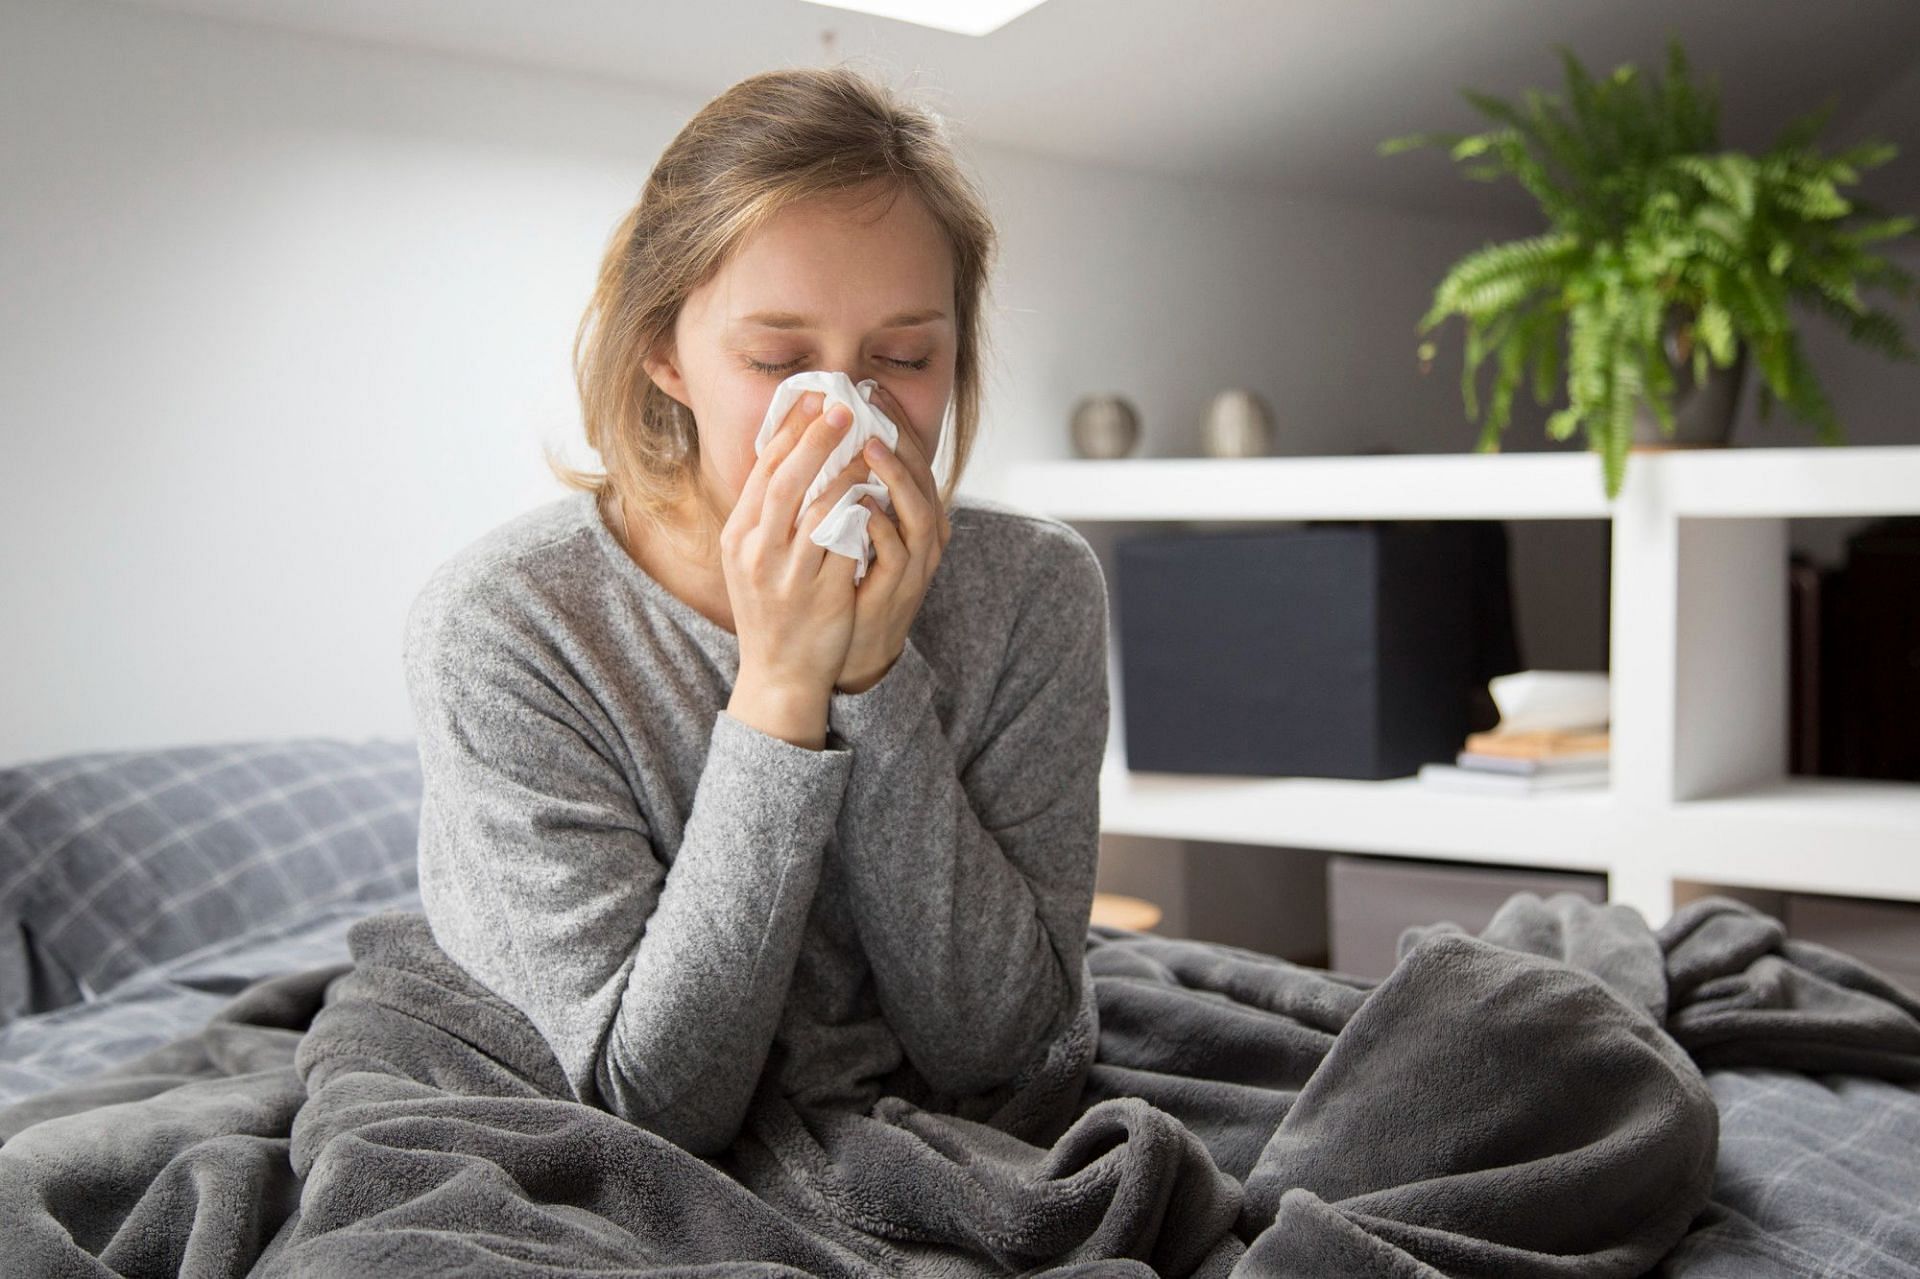 Some common symptoms of cold may include a runny nose, headaches, and cough (Image via freepik)